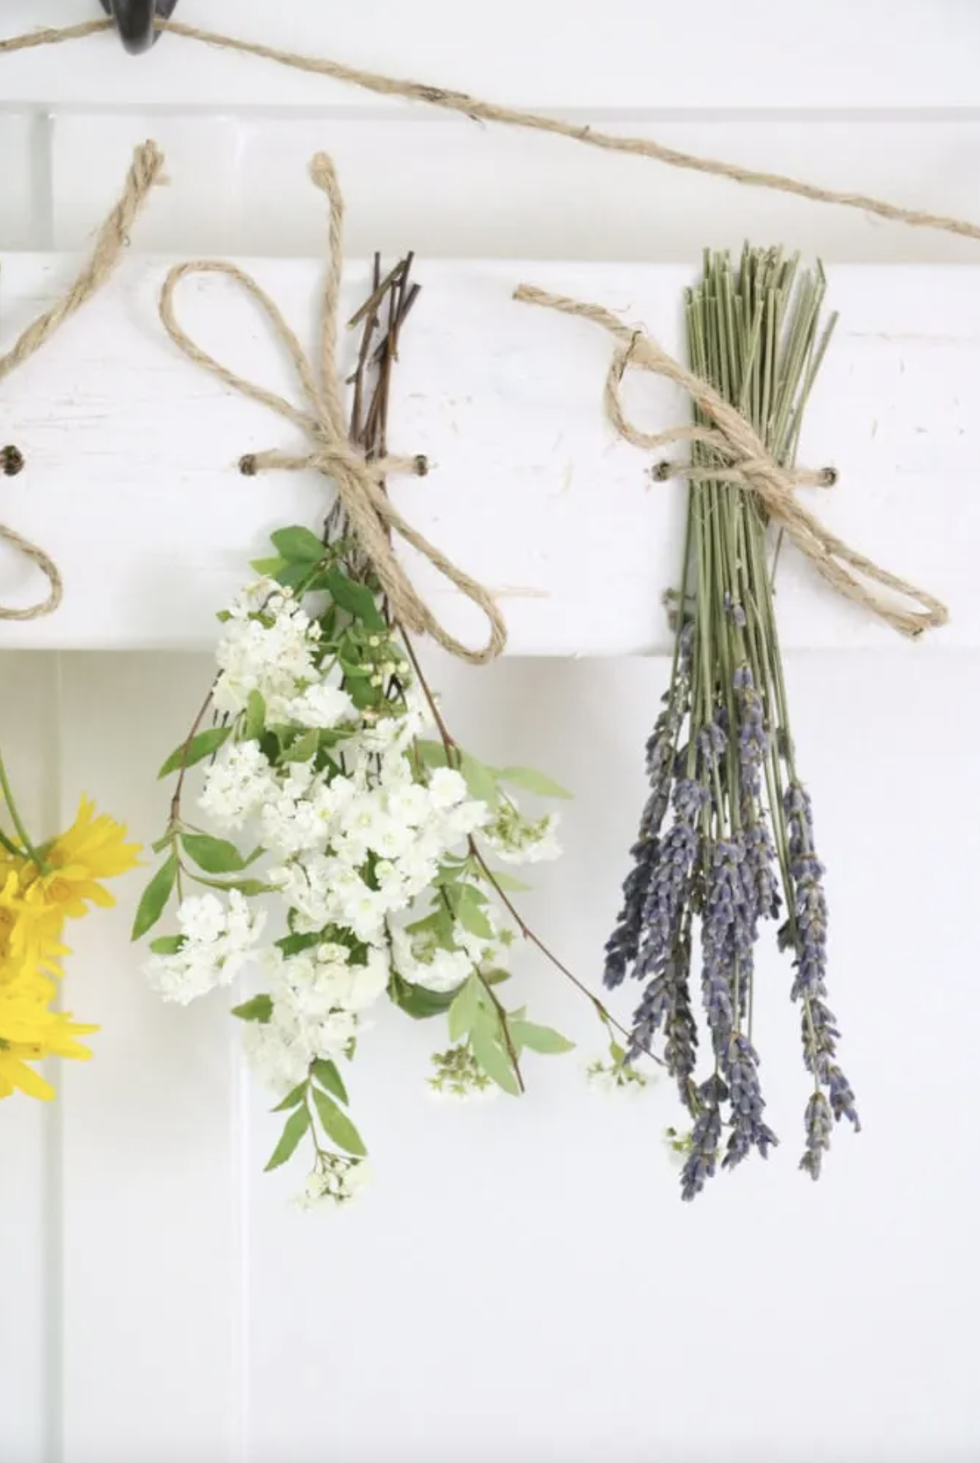 How to Preserve and Use Dried Flowers